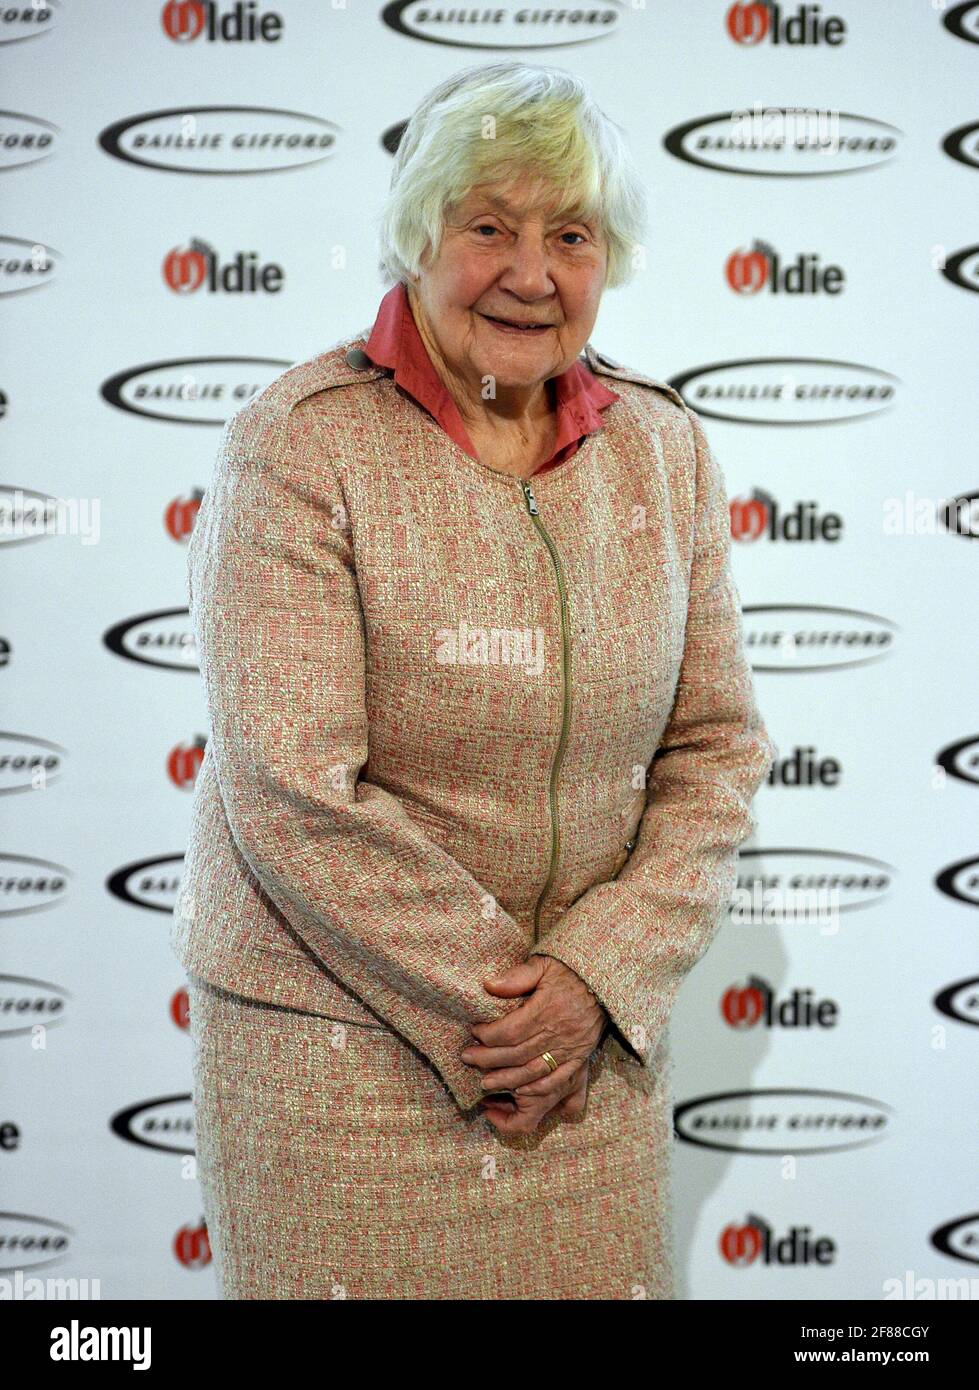 File photo dated 30/01/18 of Shirley Williams attending The Oldie of the Year Awards, at Simpsons in the Strand, central London. The former cabinet minister and Liberal Democrat peer, Baroness Williams of Crosby, has died aged 90, the Liberal Democrats have said. Issue date: Monday April 12, 2021. Stock Photo